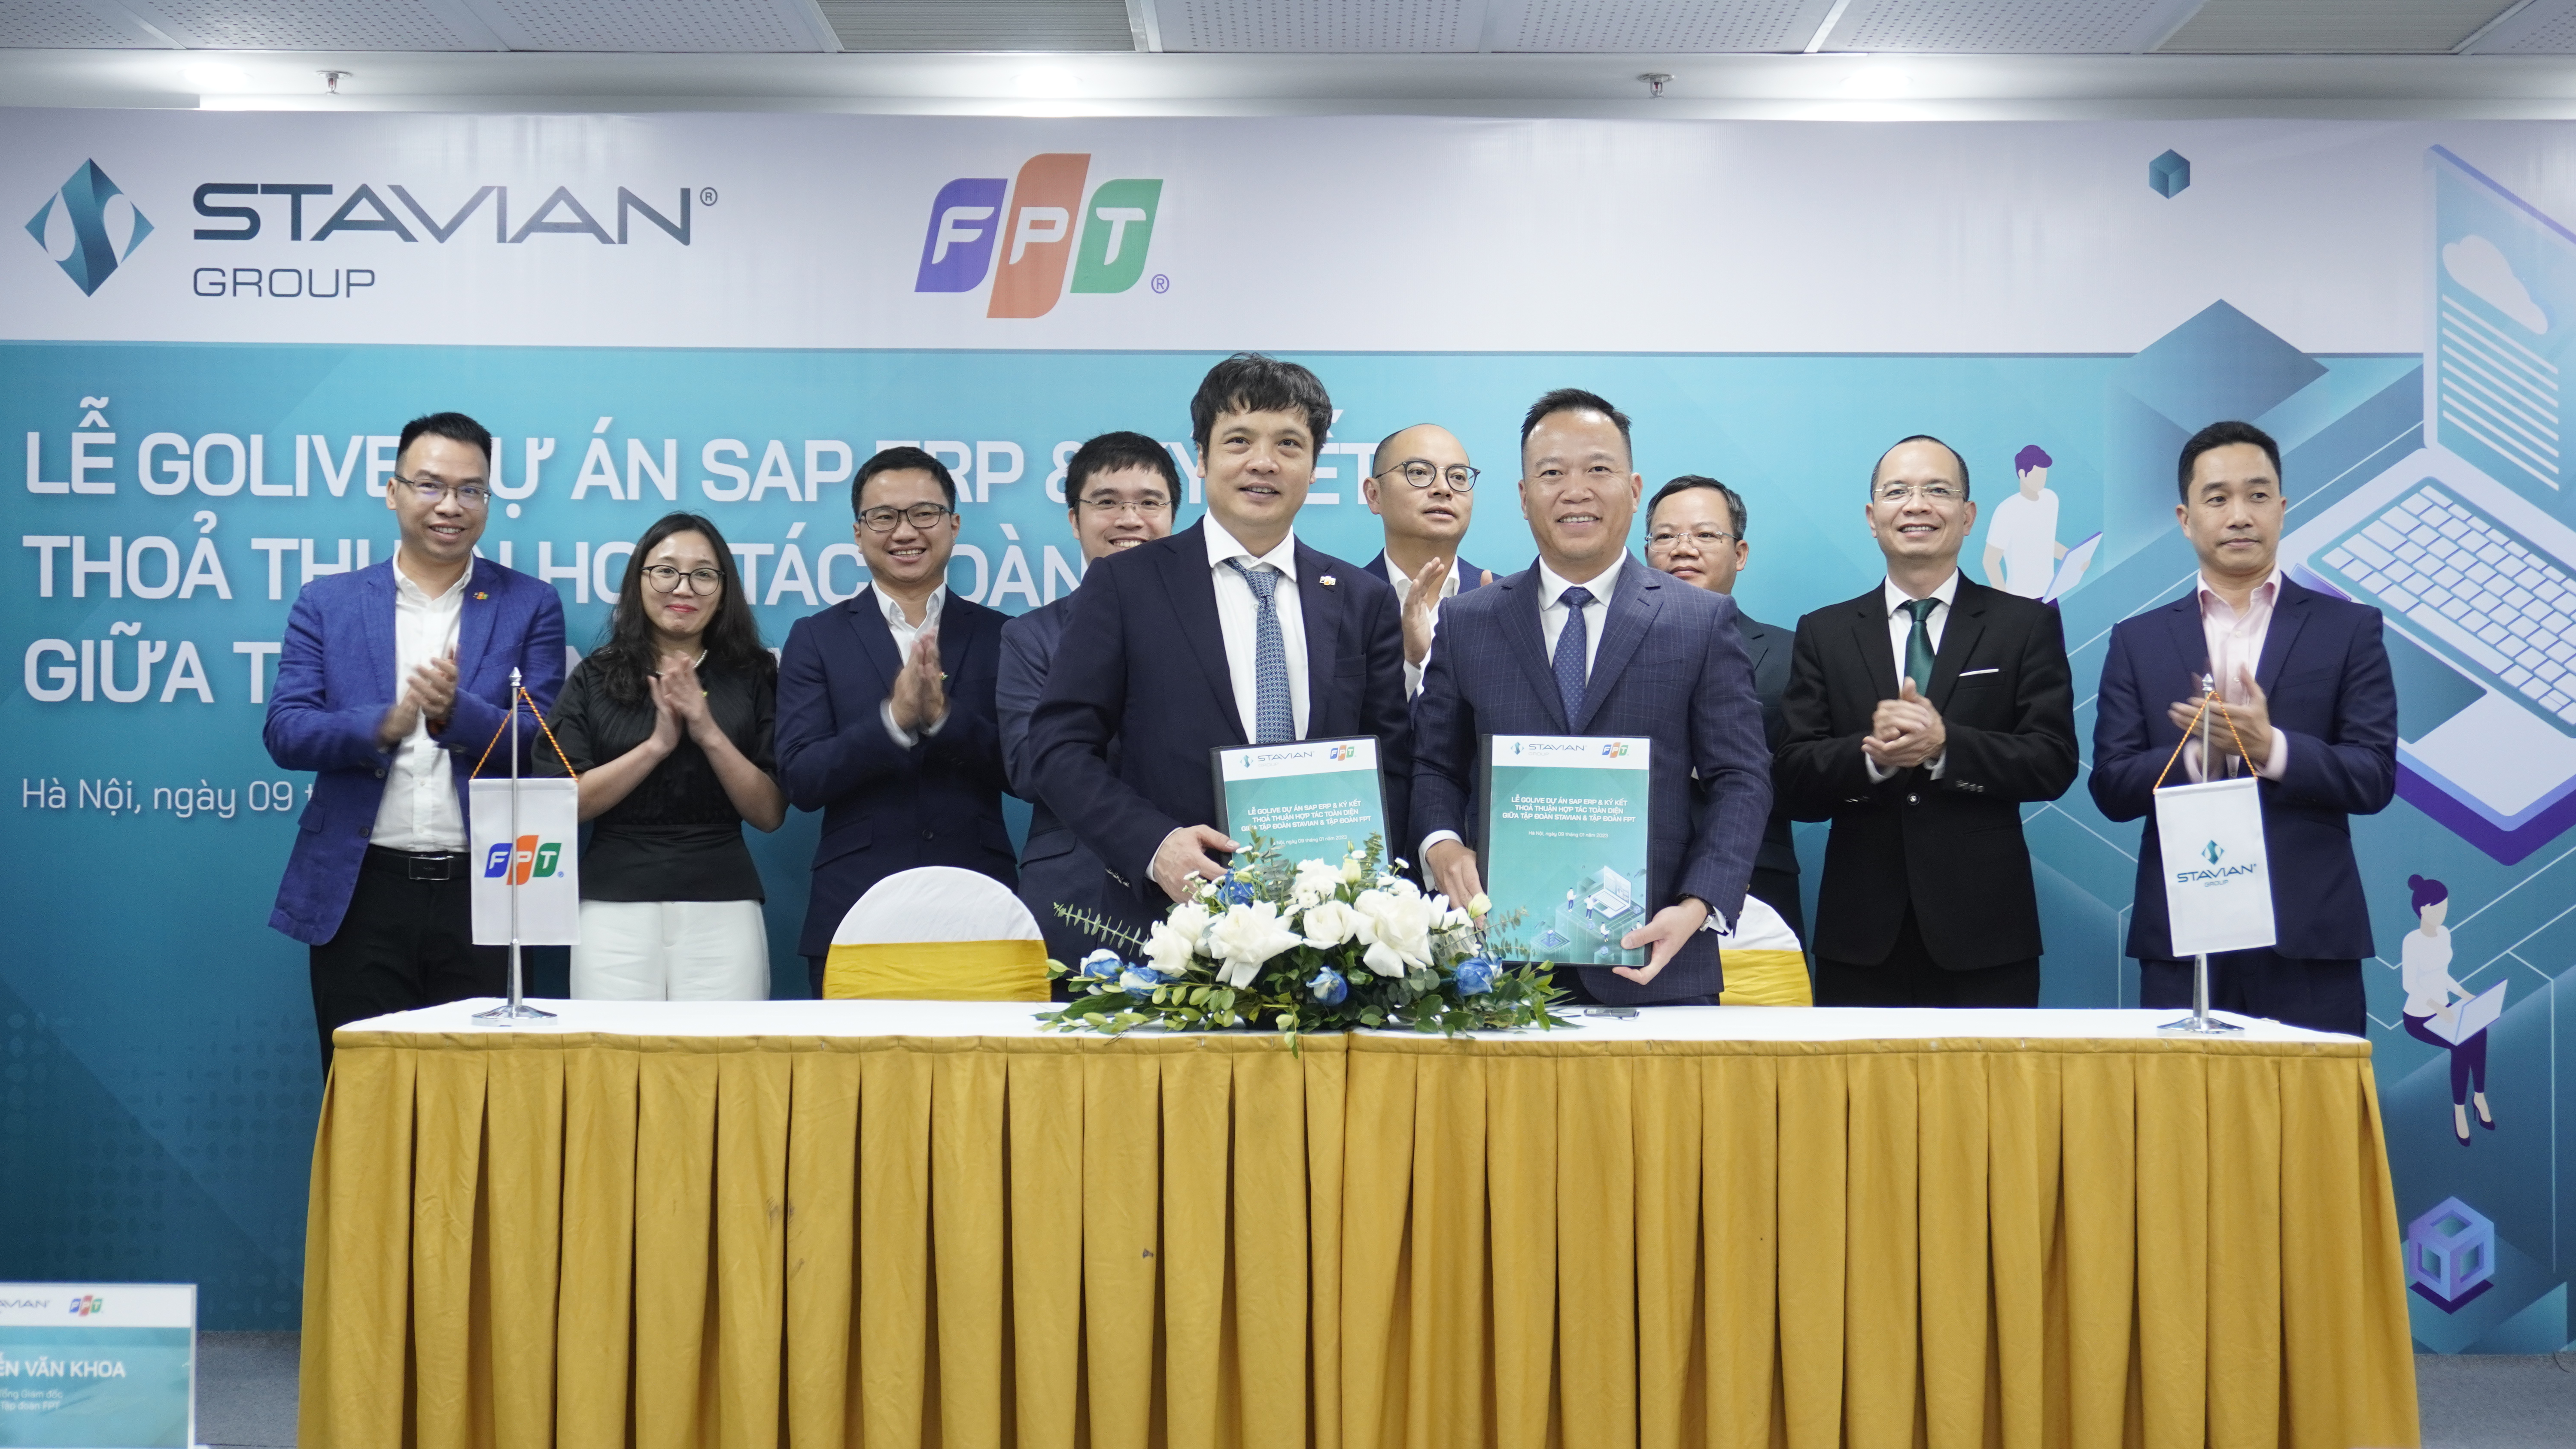 Mr. Dinh Duc Thang (right), Chairman and CEO of the Stavian Group, and Mr. Nguyen Van Khoa (left), General Director of the FPT Corporation, at the signing ceremony.